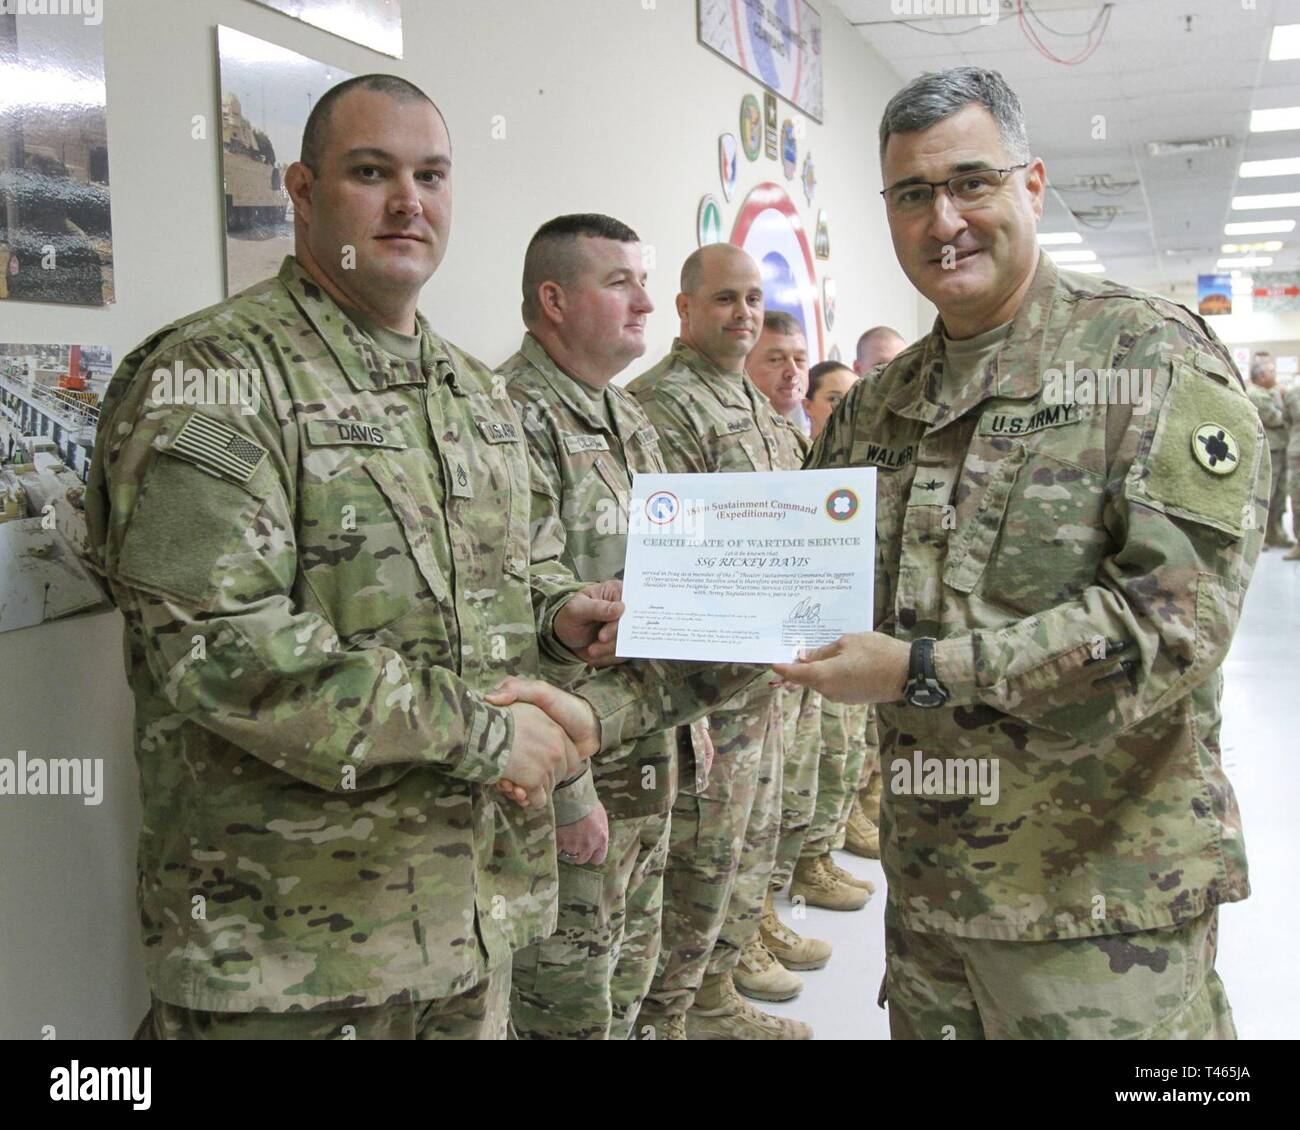 Brig. Gen. Clint E. Walker, commanding general of the 184th Sustainment Command, presents a certificate of wartime service to  Staff Sgt. Rickey Davis following the placement of the 184th ESC patch on his right shoulder at Camp Arifjan, Kuwait, Mar. 3, 2019. Stock Photo